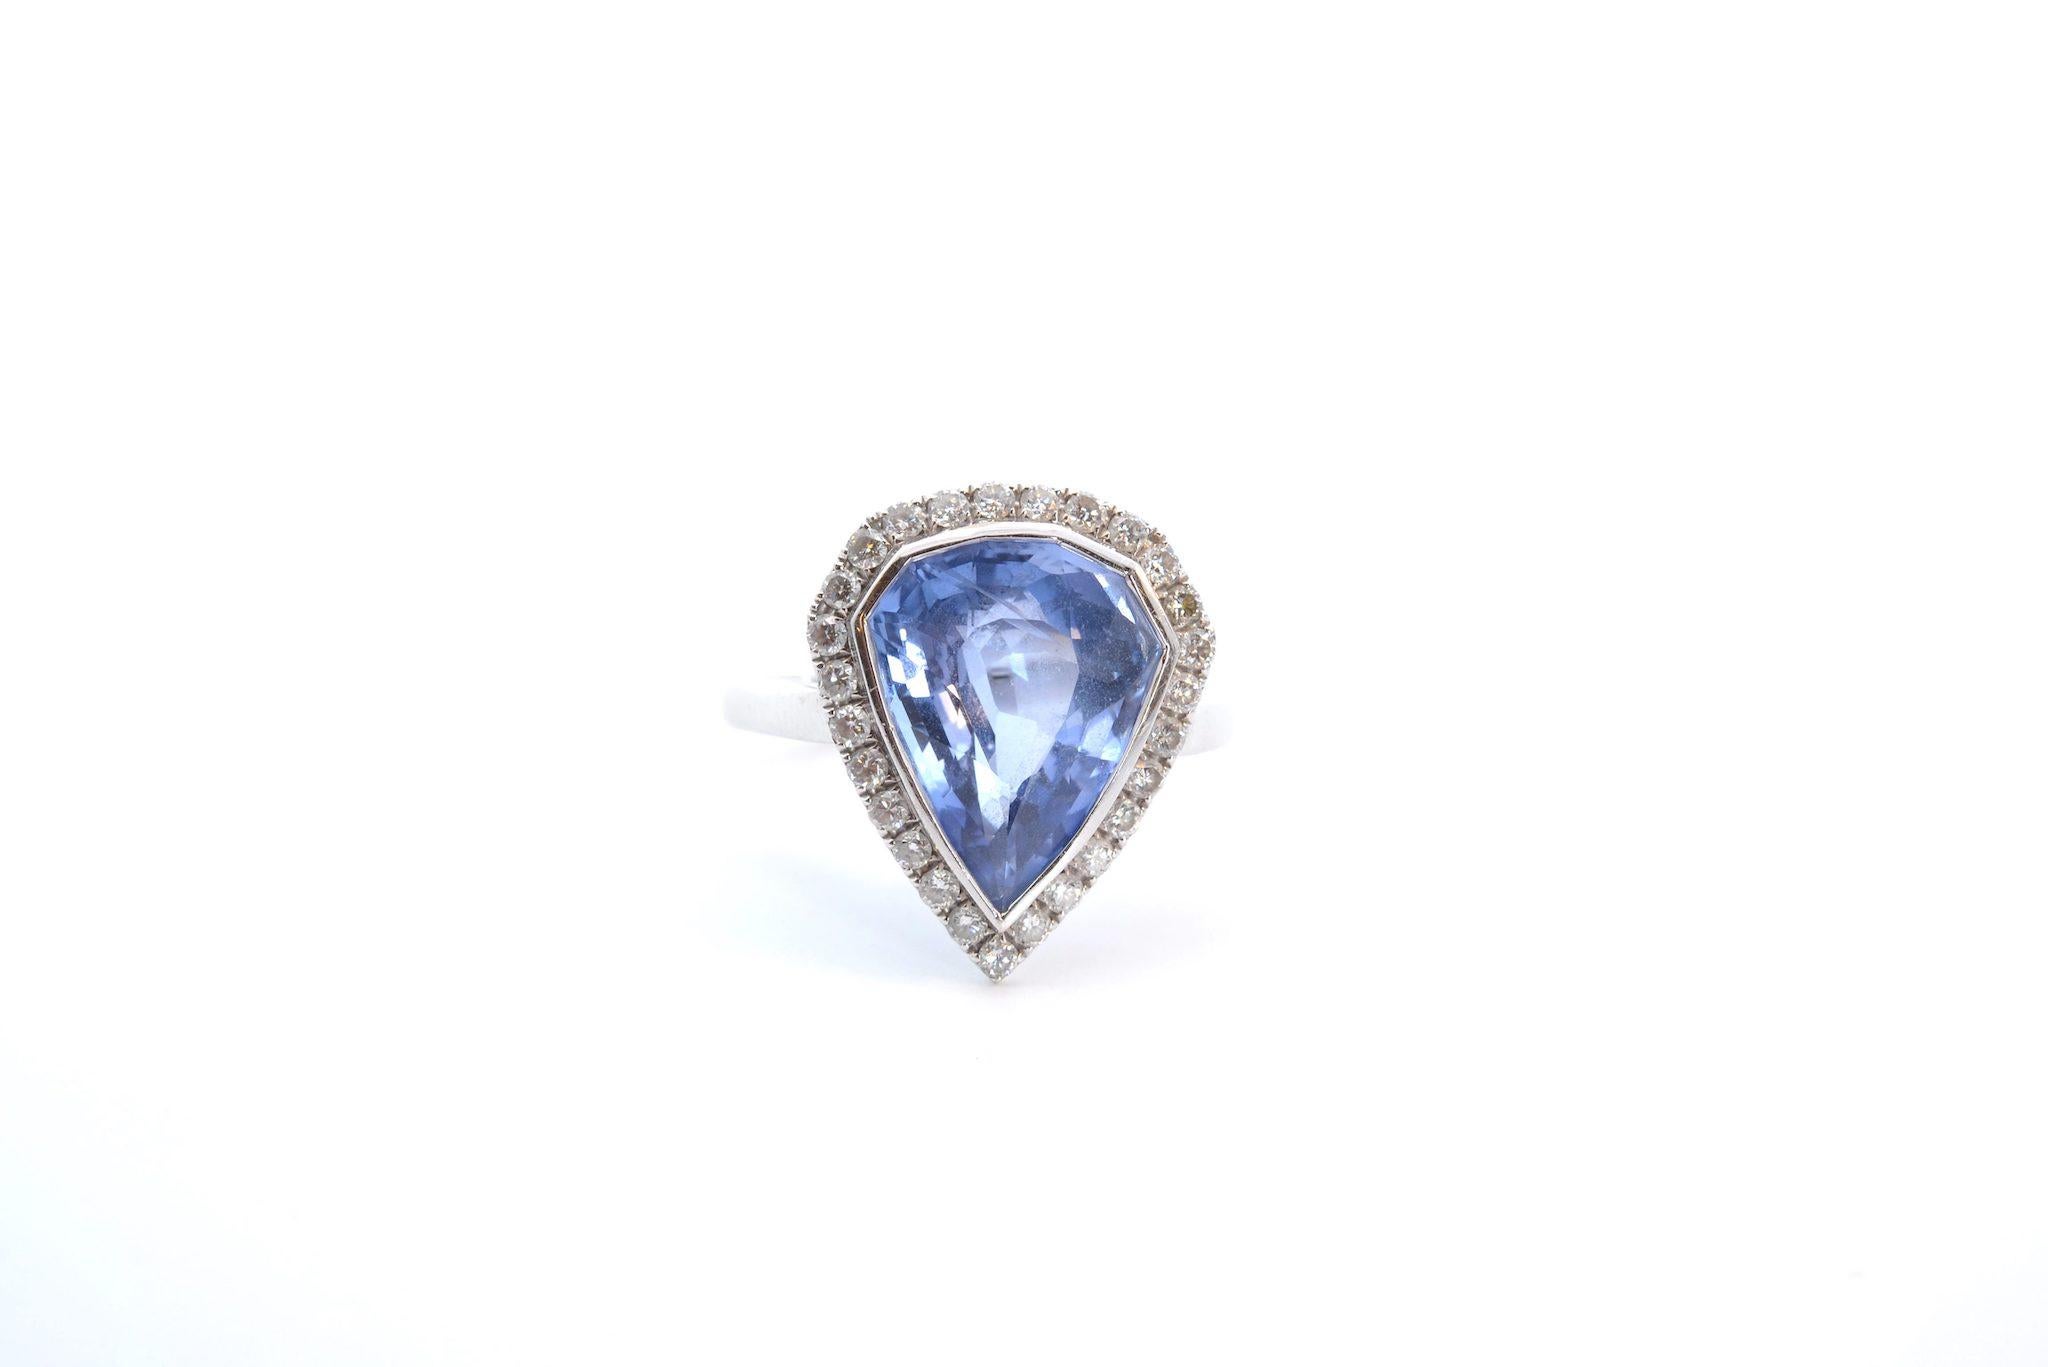 Stones: 1 natural Ceylon sapphire (Unheated) 6.05cts, 27 diamonds, weight: 0.30ct
Material: 18k white gold
Dimensions: 1.7cm x 1.4cm
Weight: 4.3g
Period: Recent
Size: 52 (free sizing)
Certificate
Ref. : 25092